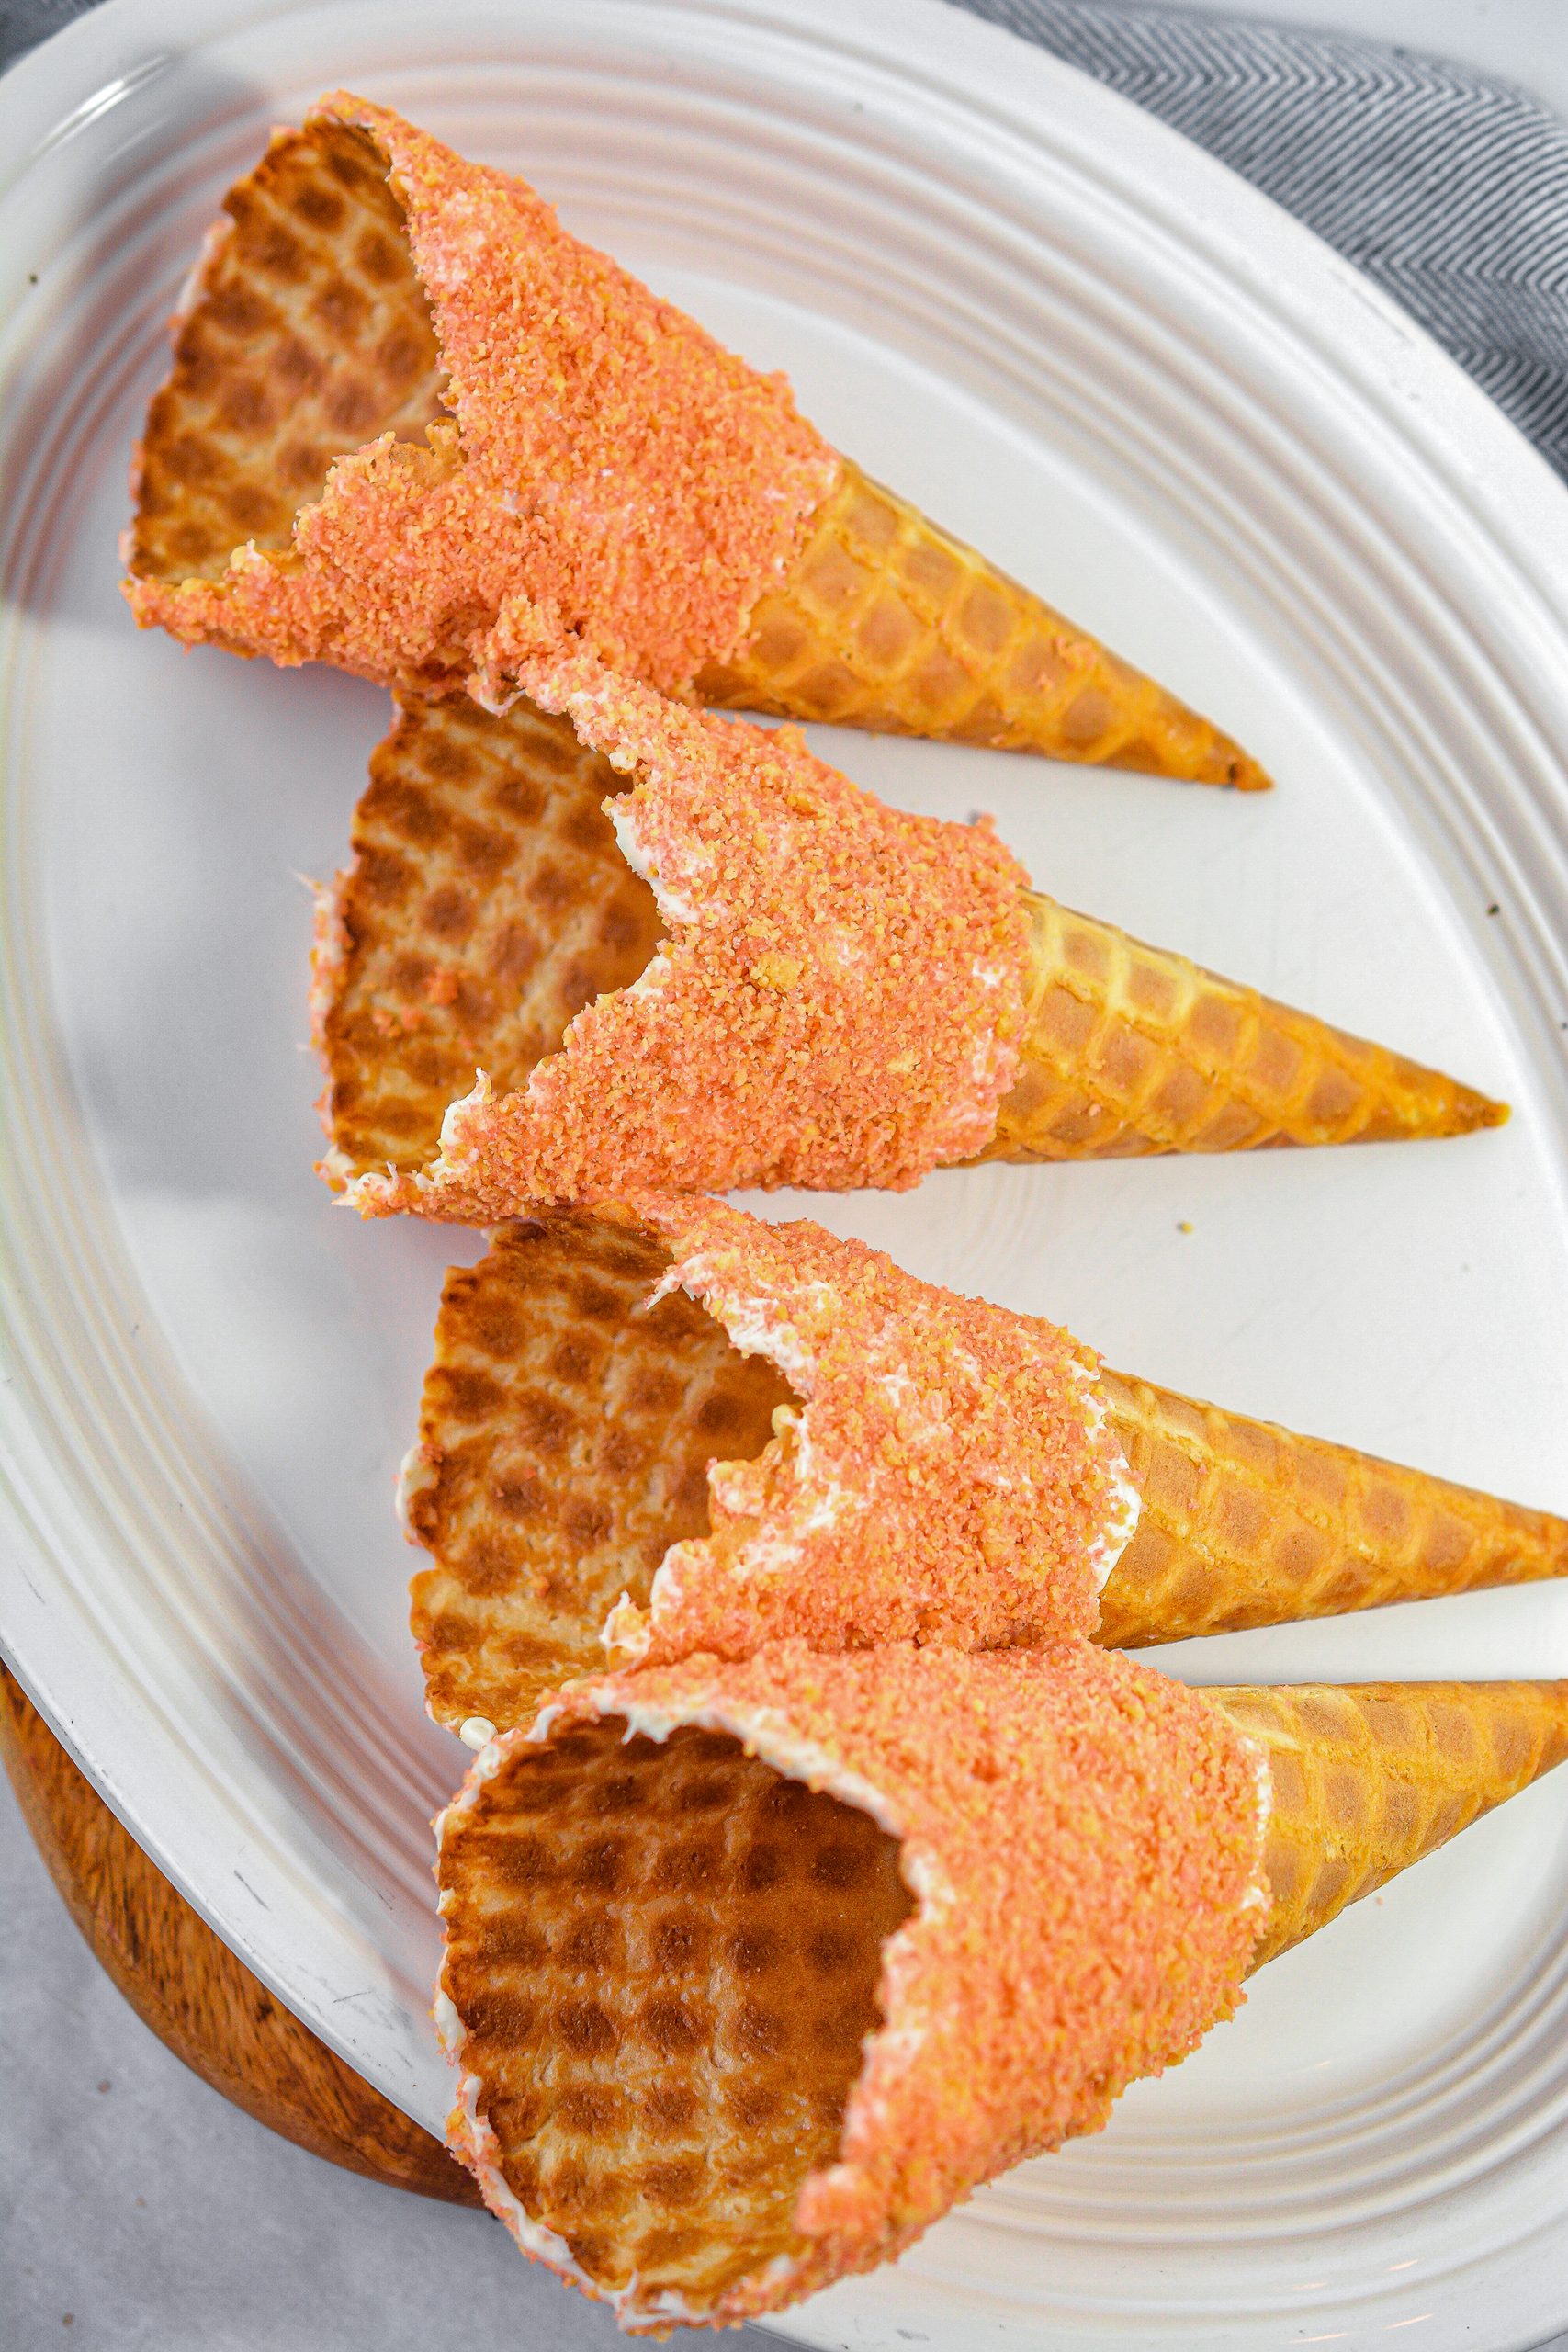 Spread the icing over the top of the outside of the waffle cones, going about halfway down the cone.